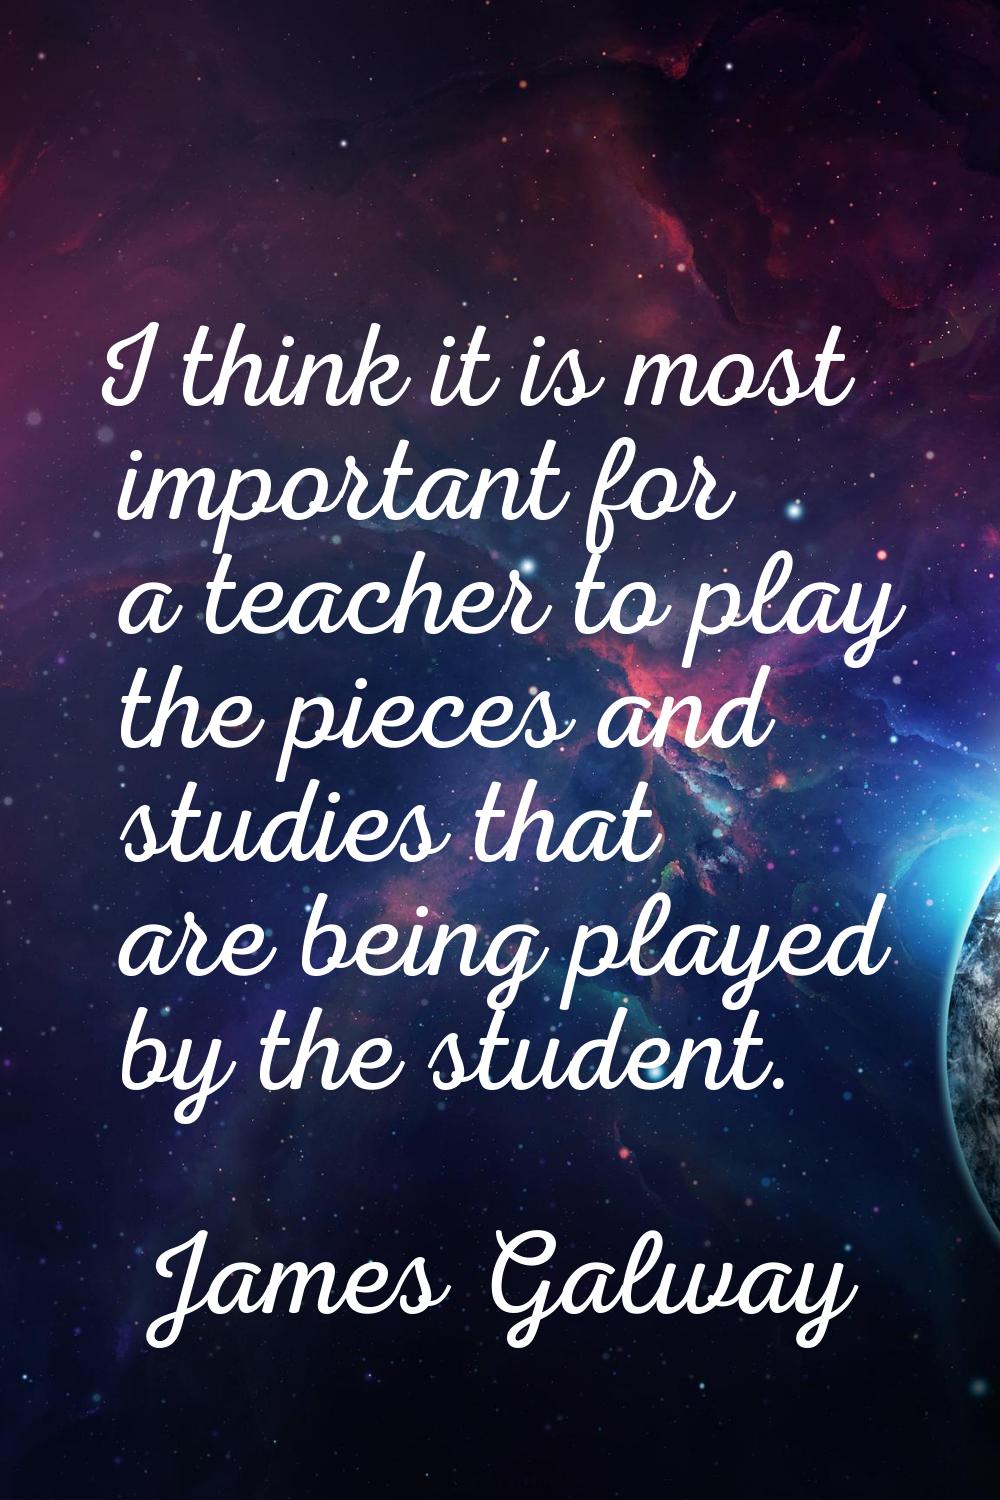 I think it is most important for a teacher to play the pieces and studies that are being played by 